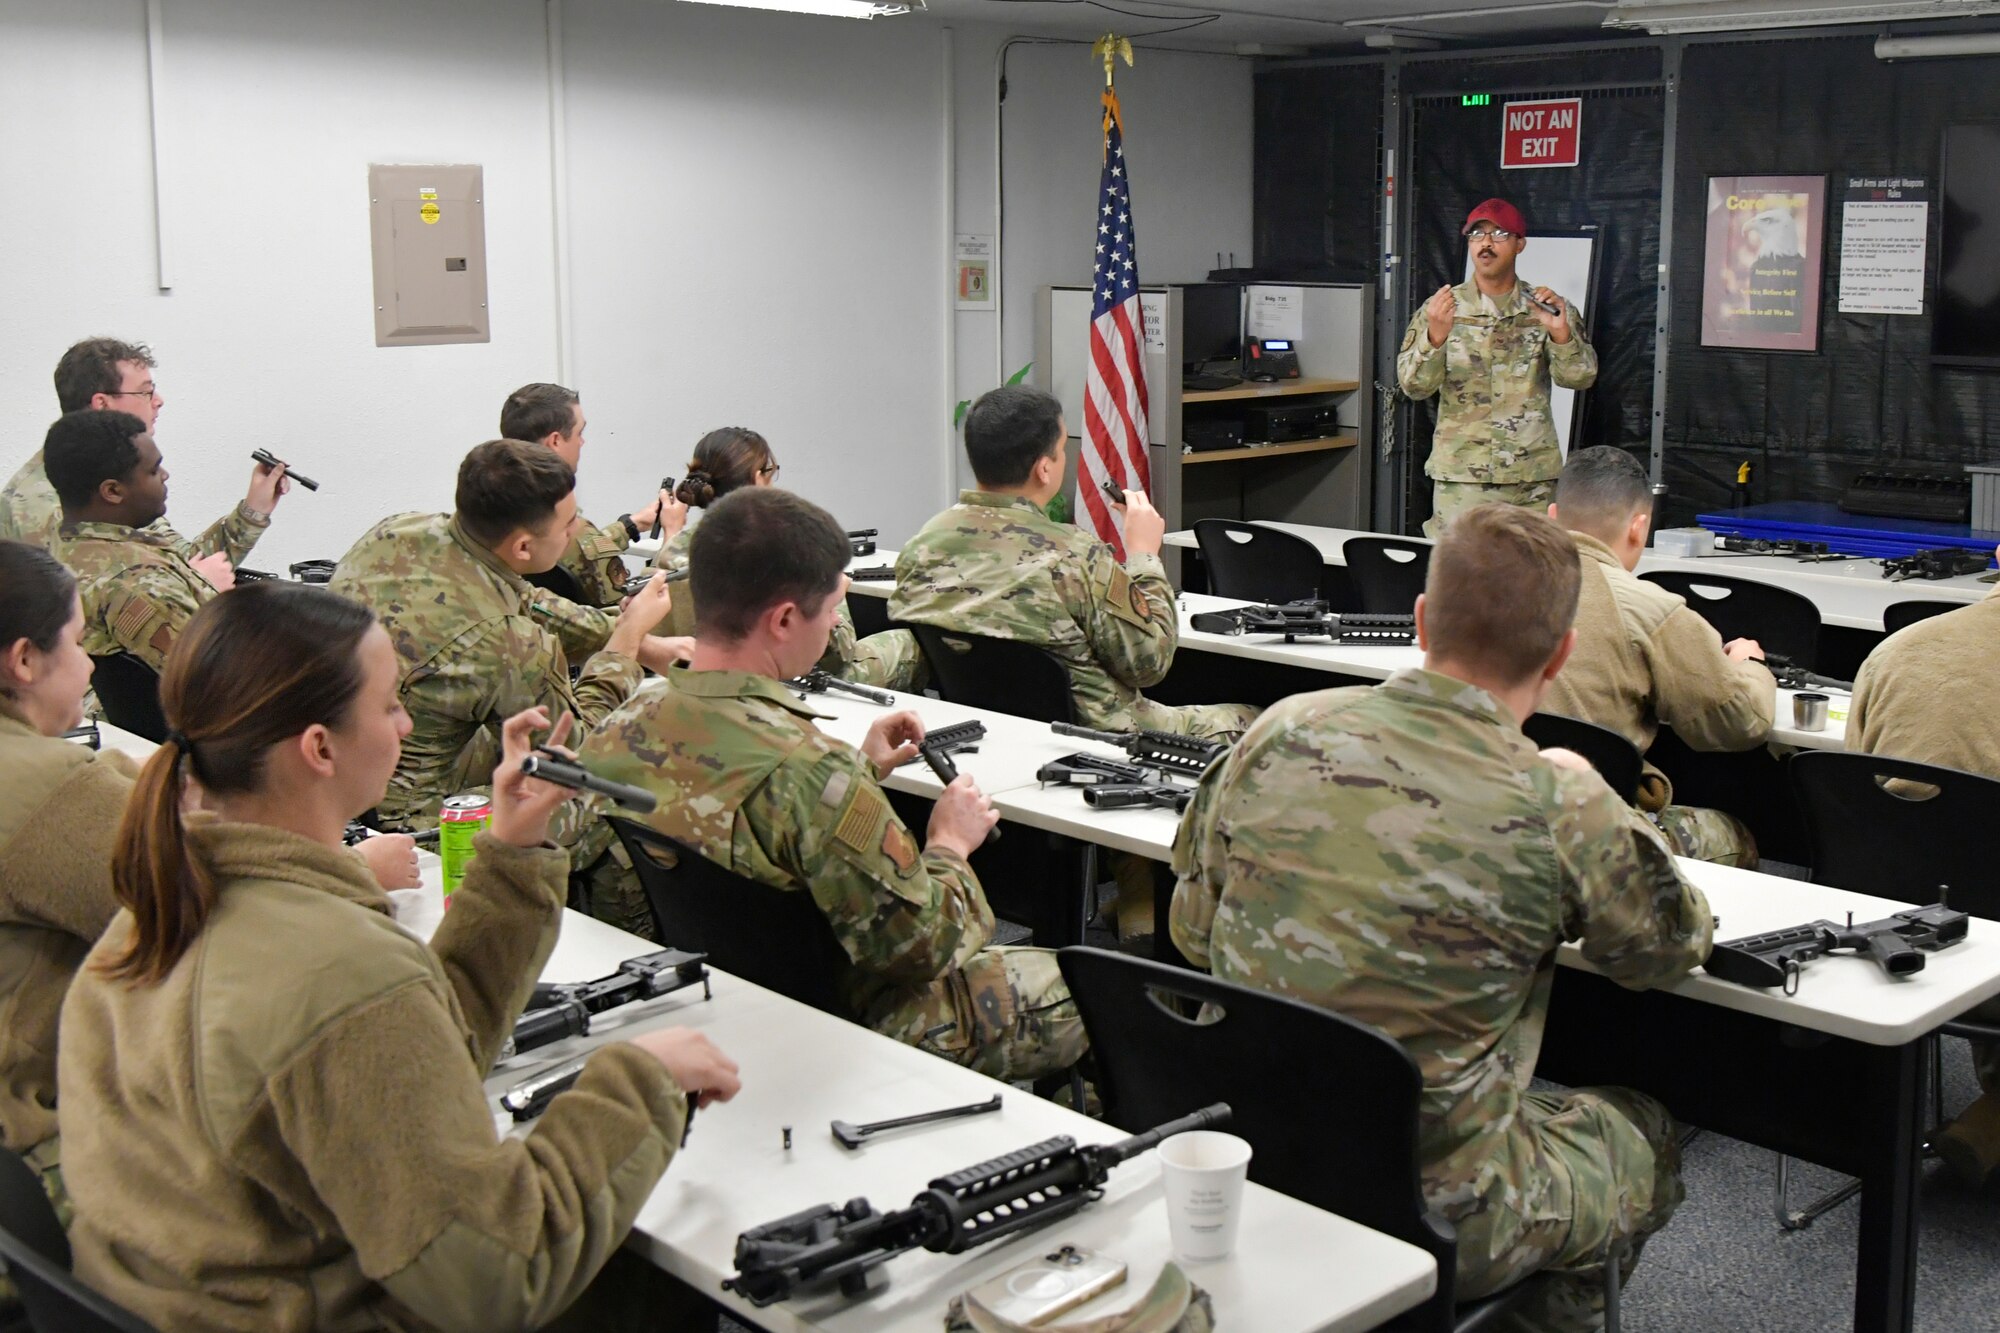 An instructor leads a class of Airmen who have weapons parts on the desk.